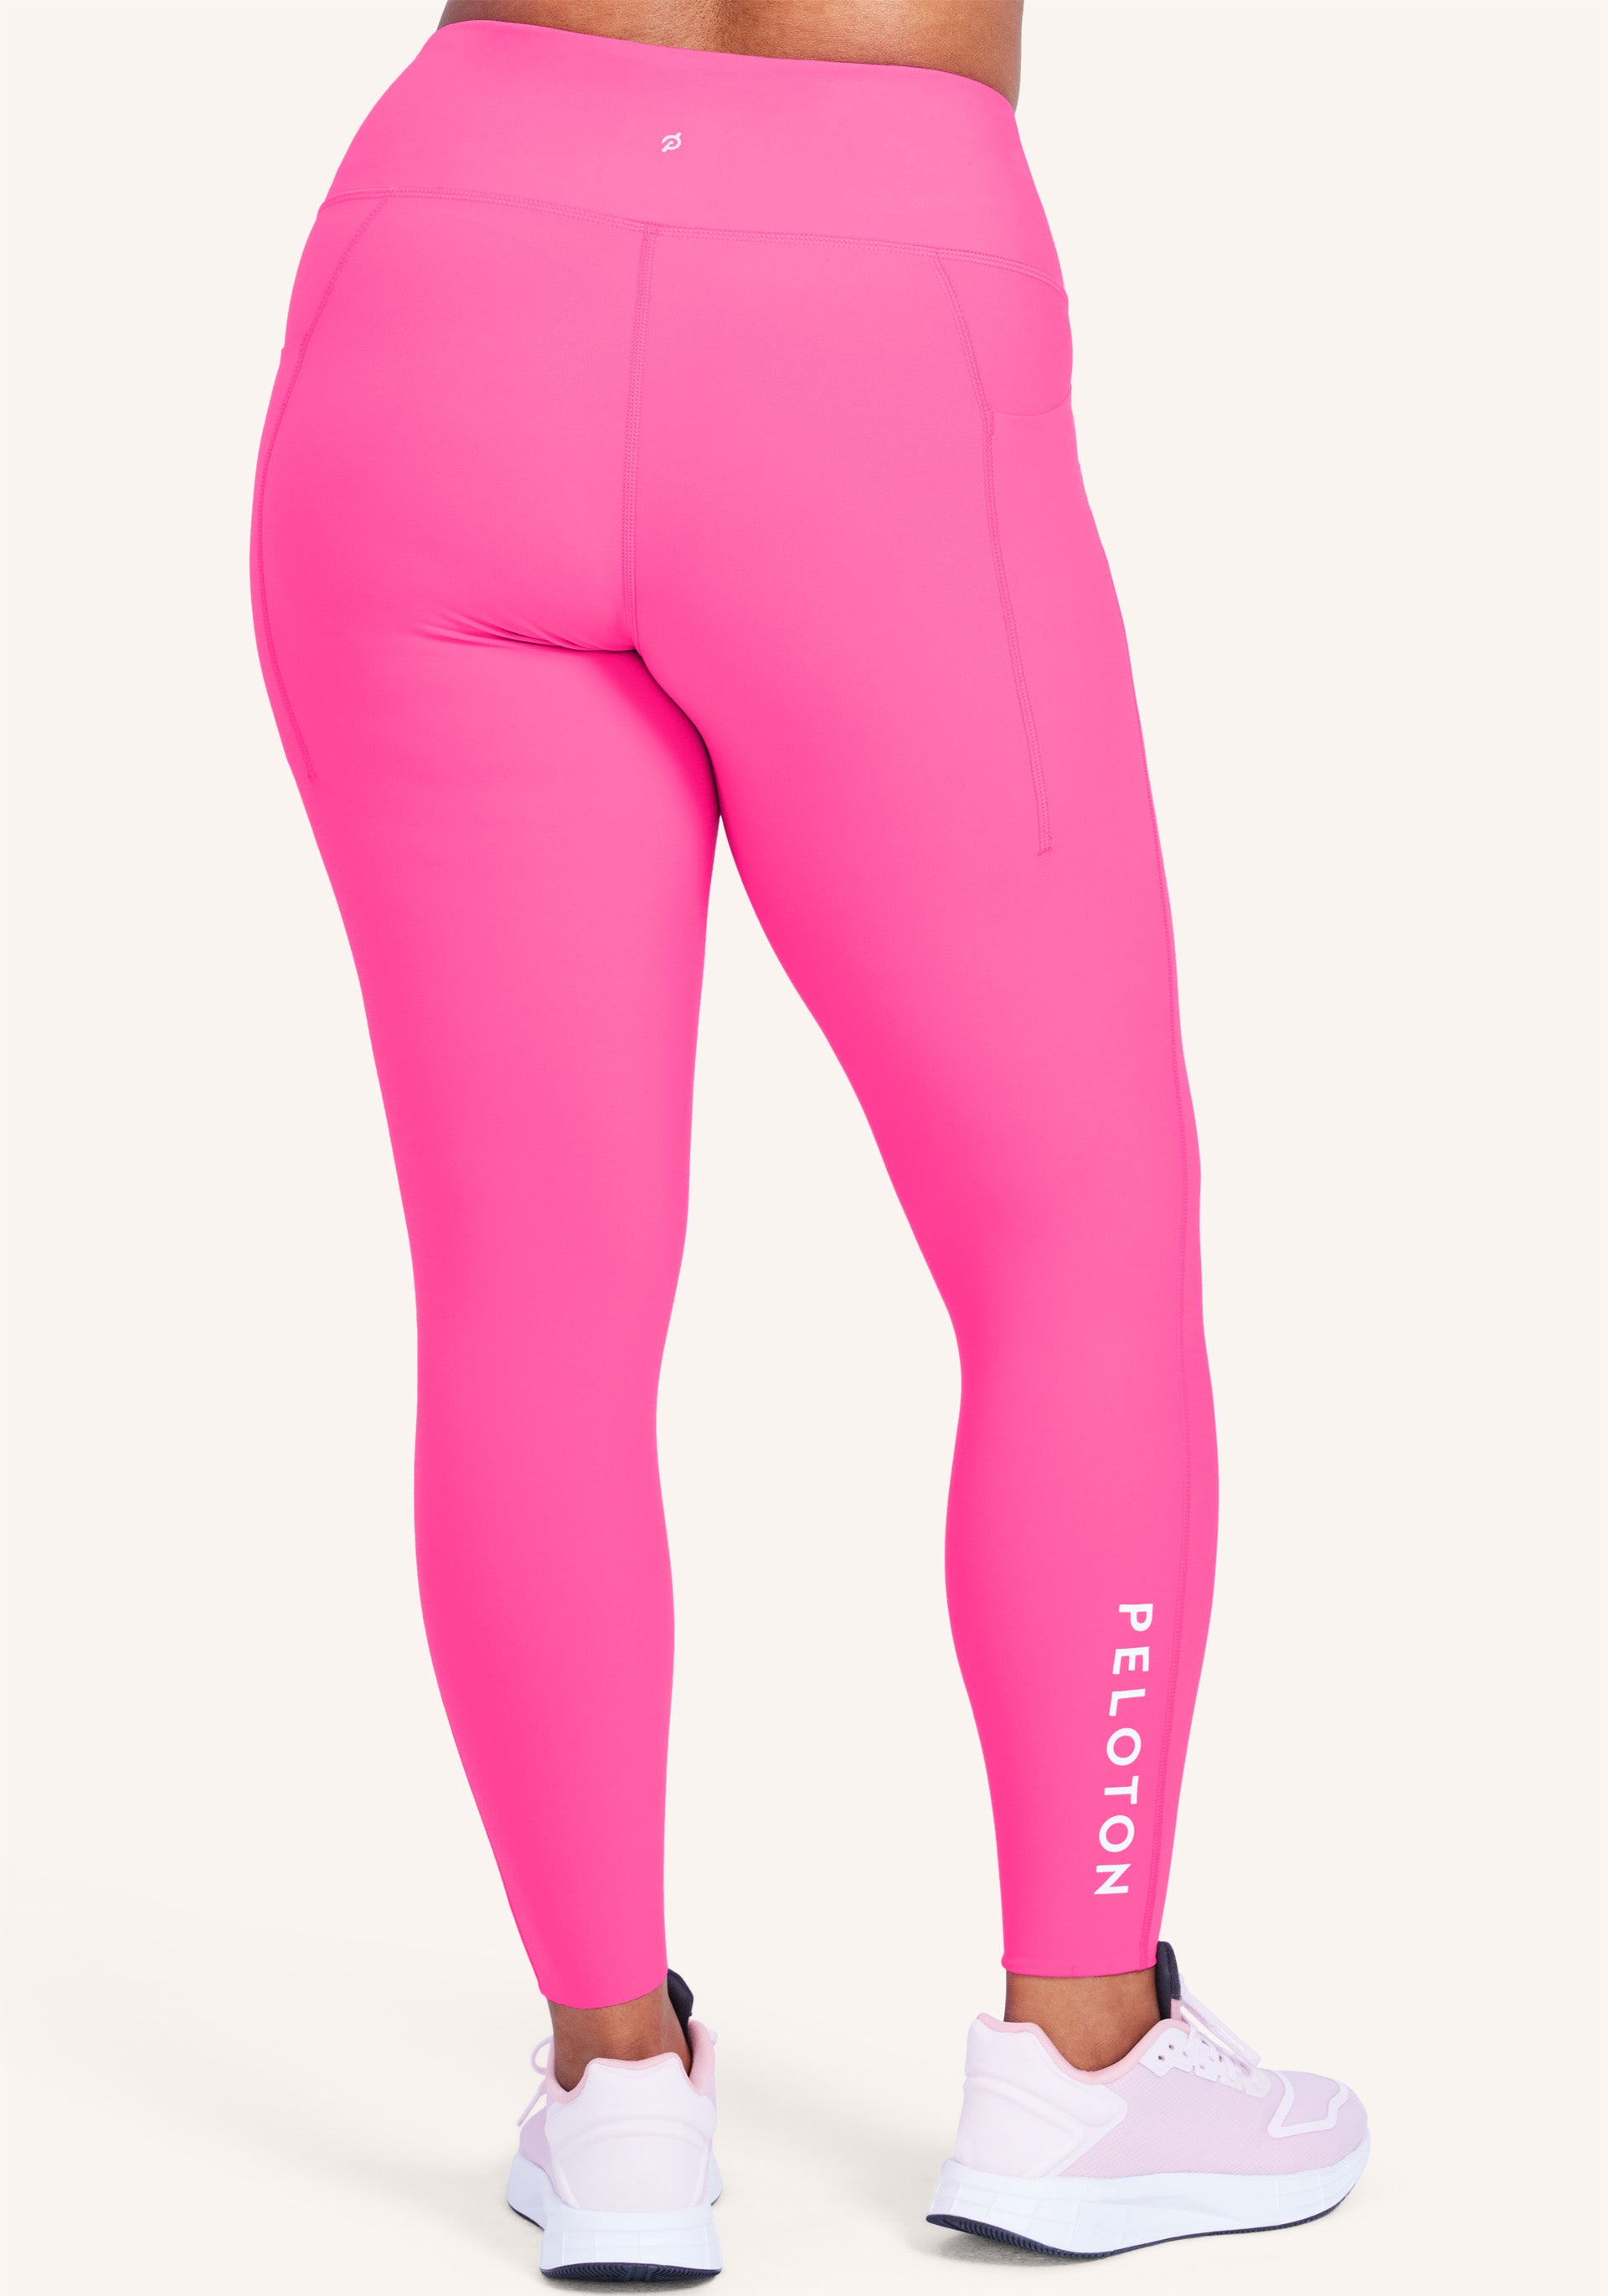 Hipkini Legging Rise Centaurus,Your one stop shop to the hottest